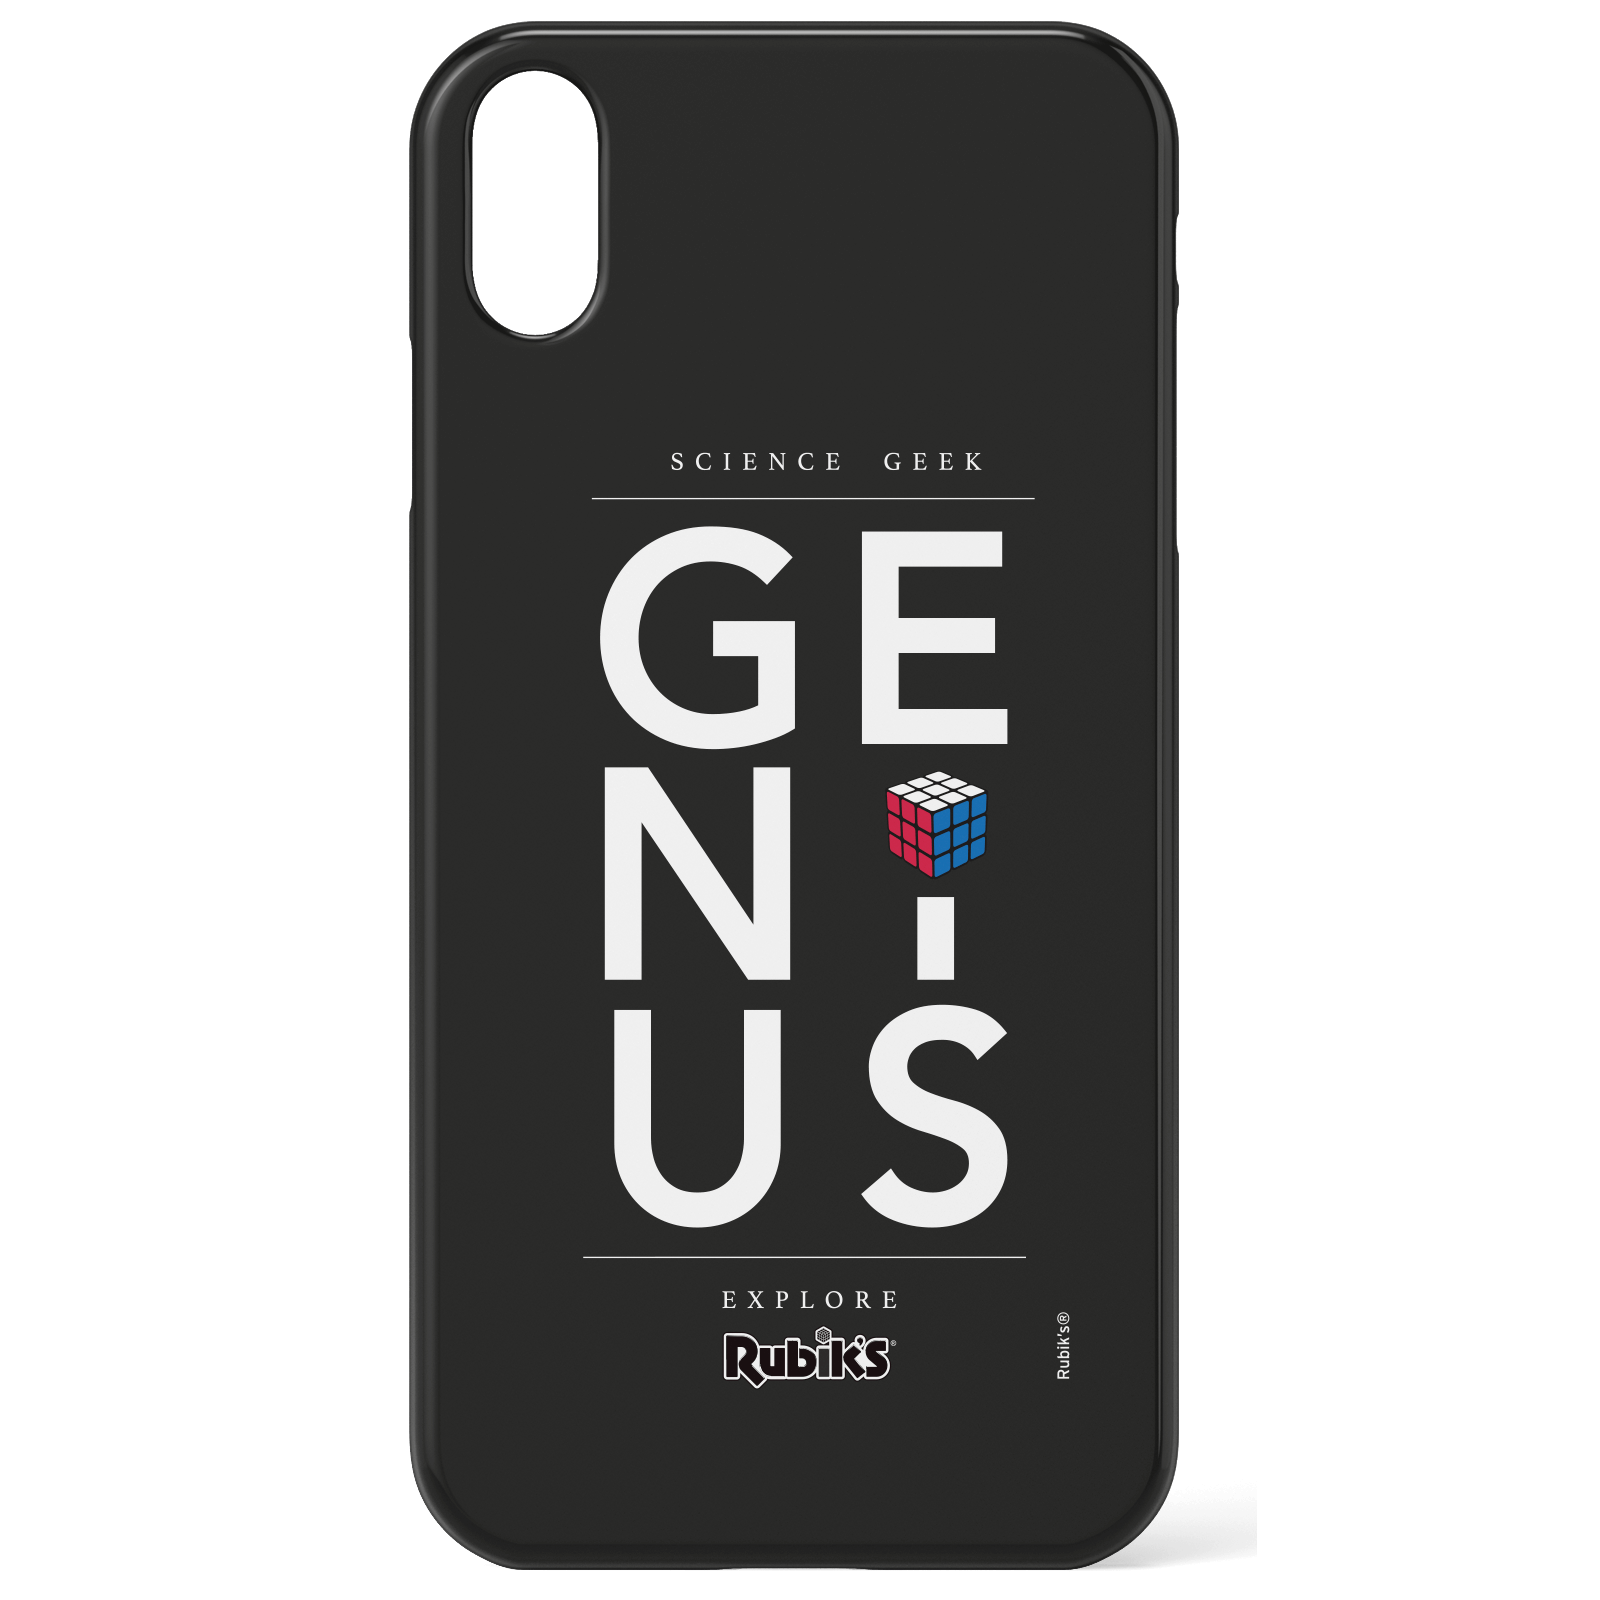 Genius Rubik's Phone Case Phone Case for iPhone and Android - iPhone 8 - Tough Case - Matte